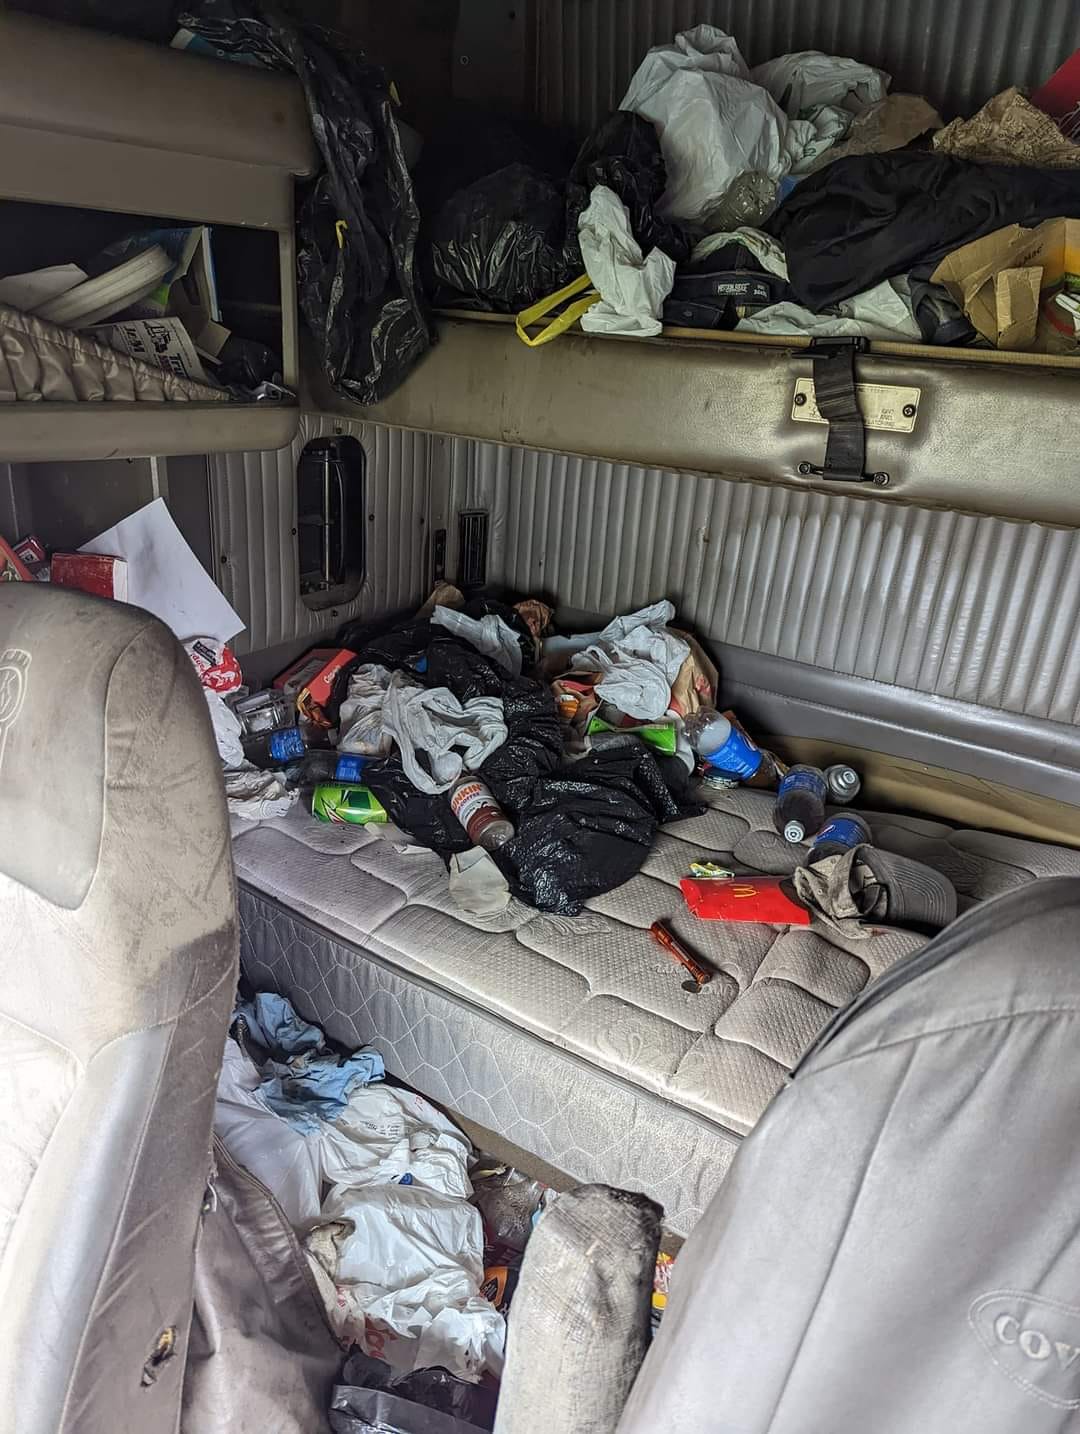 The cab of this truck is so dirty it has to be seen to be believed